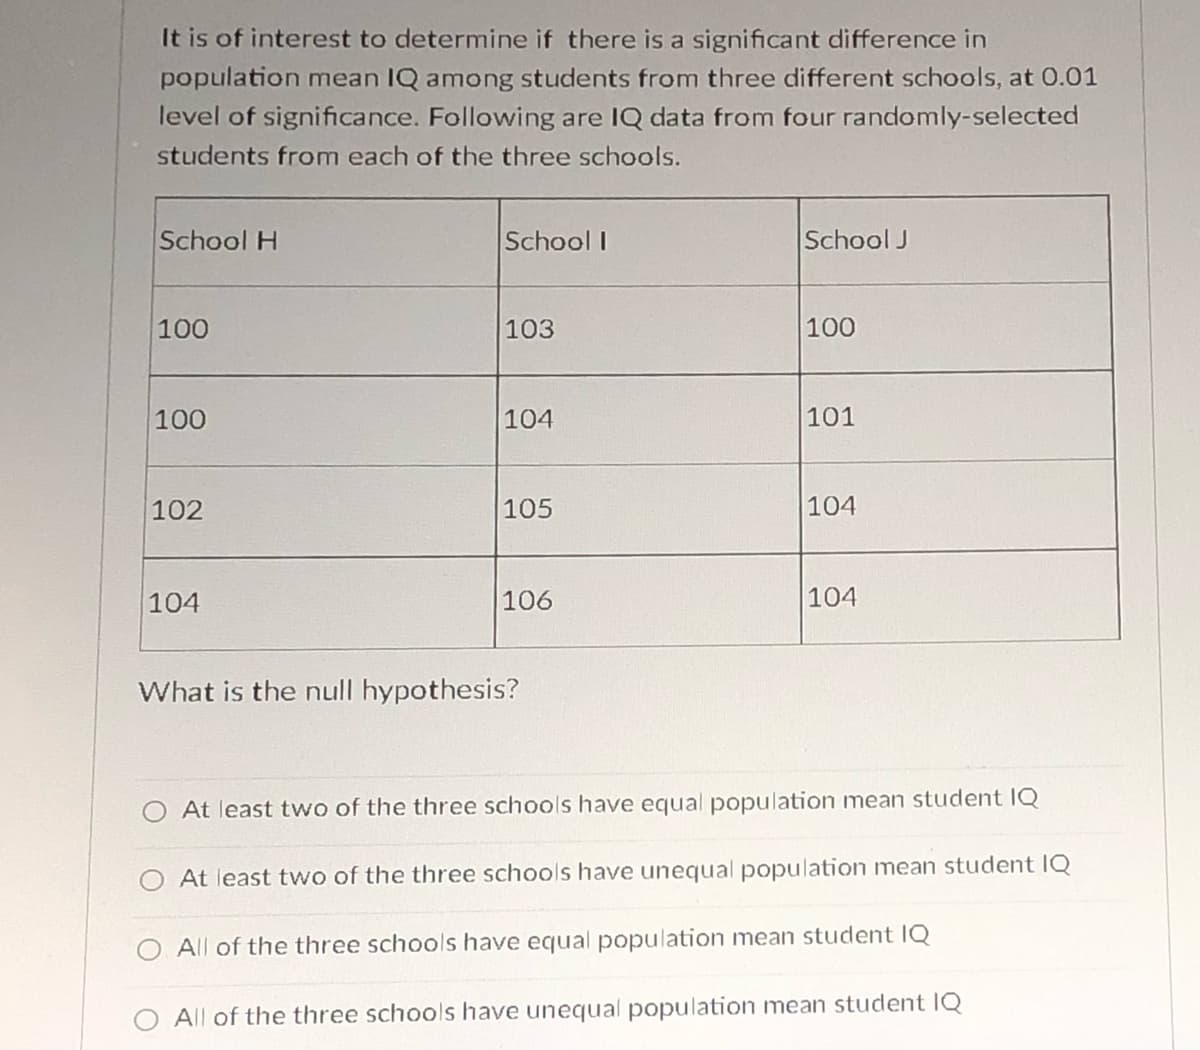 It is of interest to determine if there is a significant difference in
population mean IQ among students from three different schools, at 0.01
level of significance. Following are IQ data from four randomly-selected
students from each of the three schools.
School H
School I
School J
100
103
100
100
104
101
102
105
104
104
106
104
What is the null hypothesis?
At least two of the three schools have equal population mean student IQ
At least two of the three schools have unequal population mean student IQ
O All of the three schools have equal population mean student IQ
All of the three schools have unequal population mean student IQ
